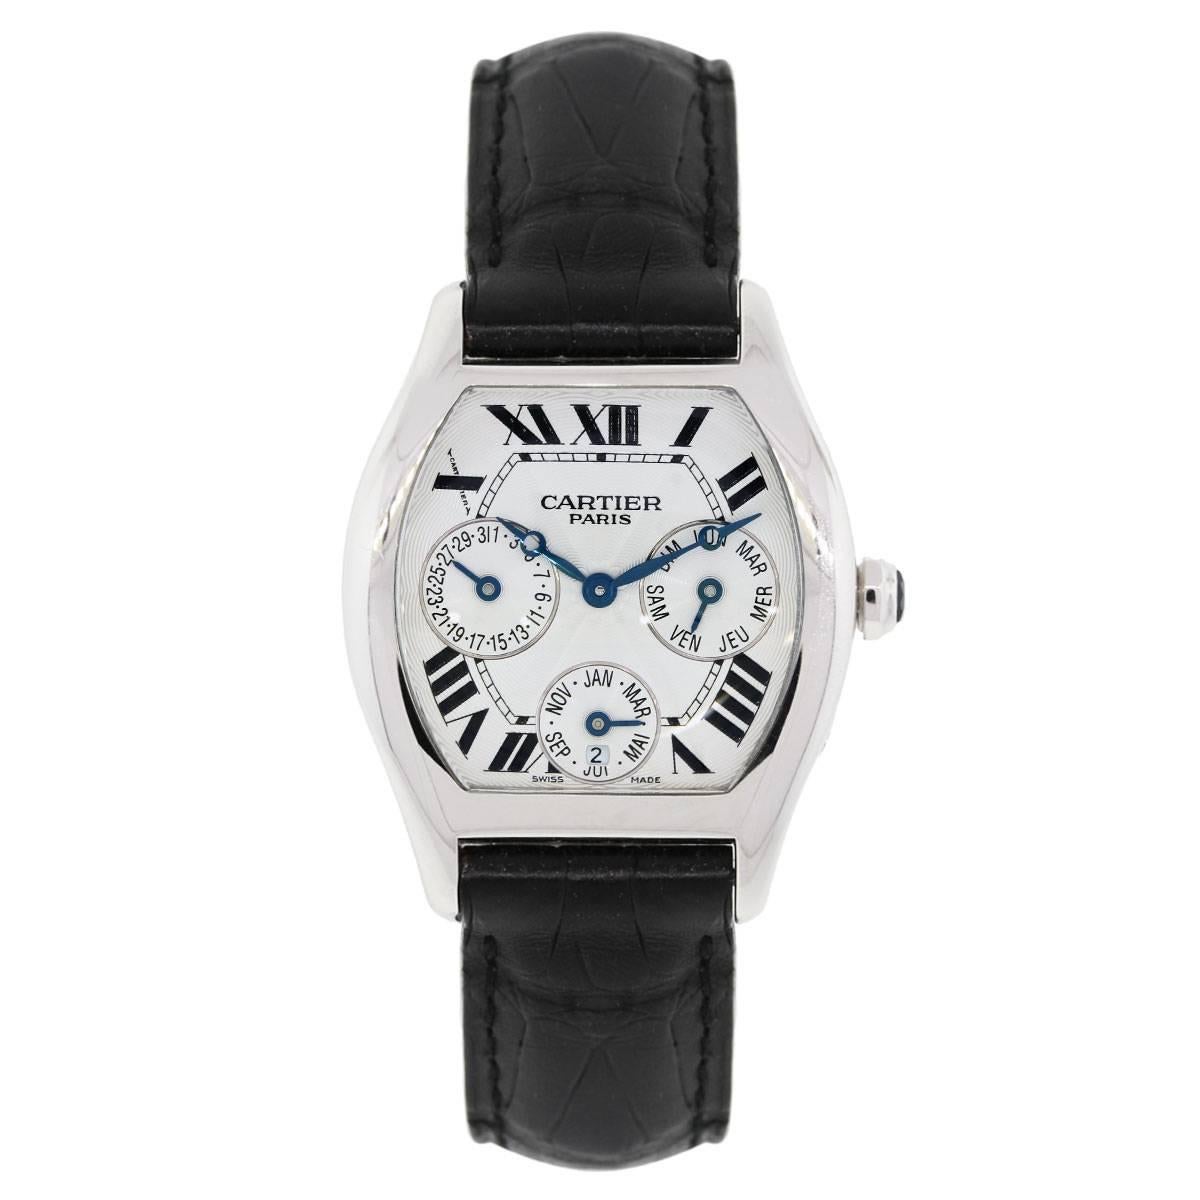 Brand: Cartier
MPN: 2540
Model: Tortue
Case Material: 18k white gold
Case Diameter: 34mm x 43mm
Crystal: Sapphire crystal (scratch resistant)
Bezel: Smooth 18k white gold
Dial: White roman chronograph perpetual calendar watch with 3 sub